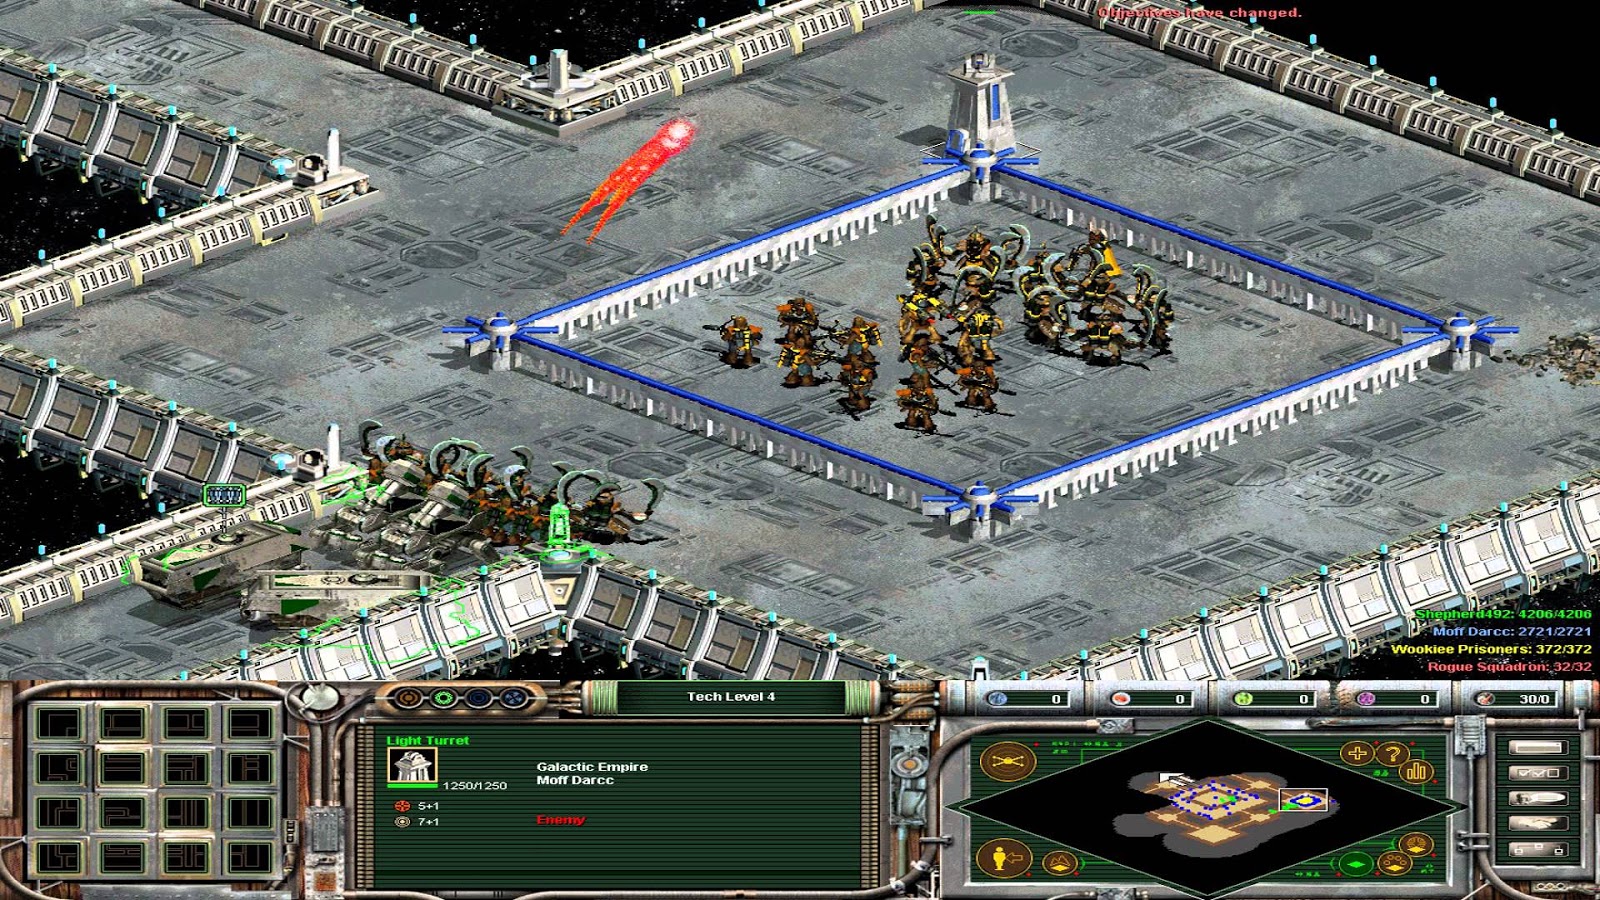 Clone campaigns. Star Wars Galactic Battlegrounds. Star Wars: Galactic Battlegrounds: Clone campaigns. Star Wars Galactic Battlegrounds Saga. Star Wars Galactic Battlegrounds Гунганы 2.